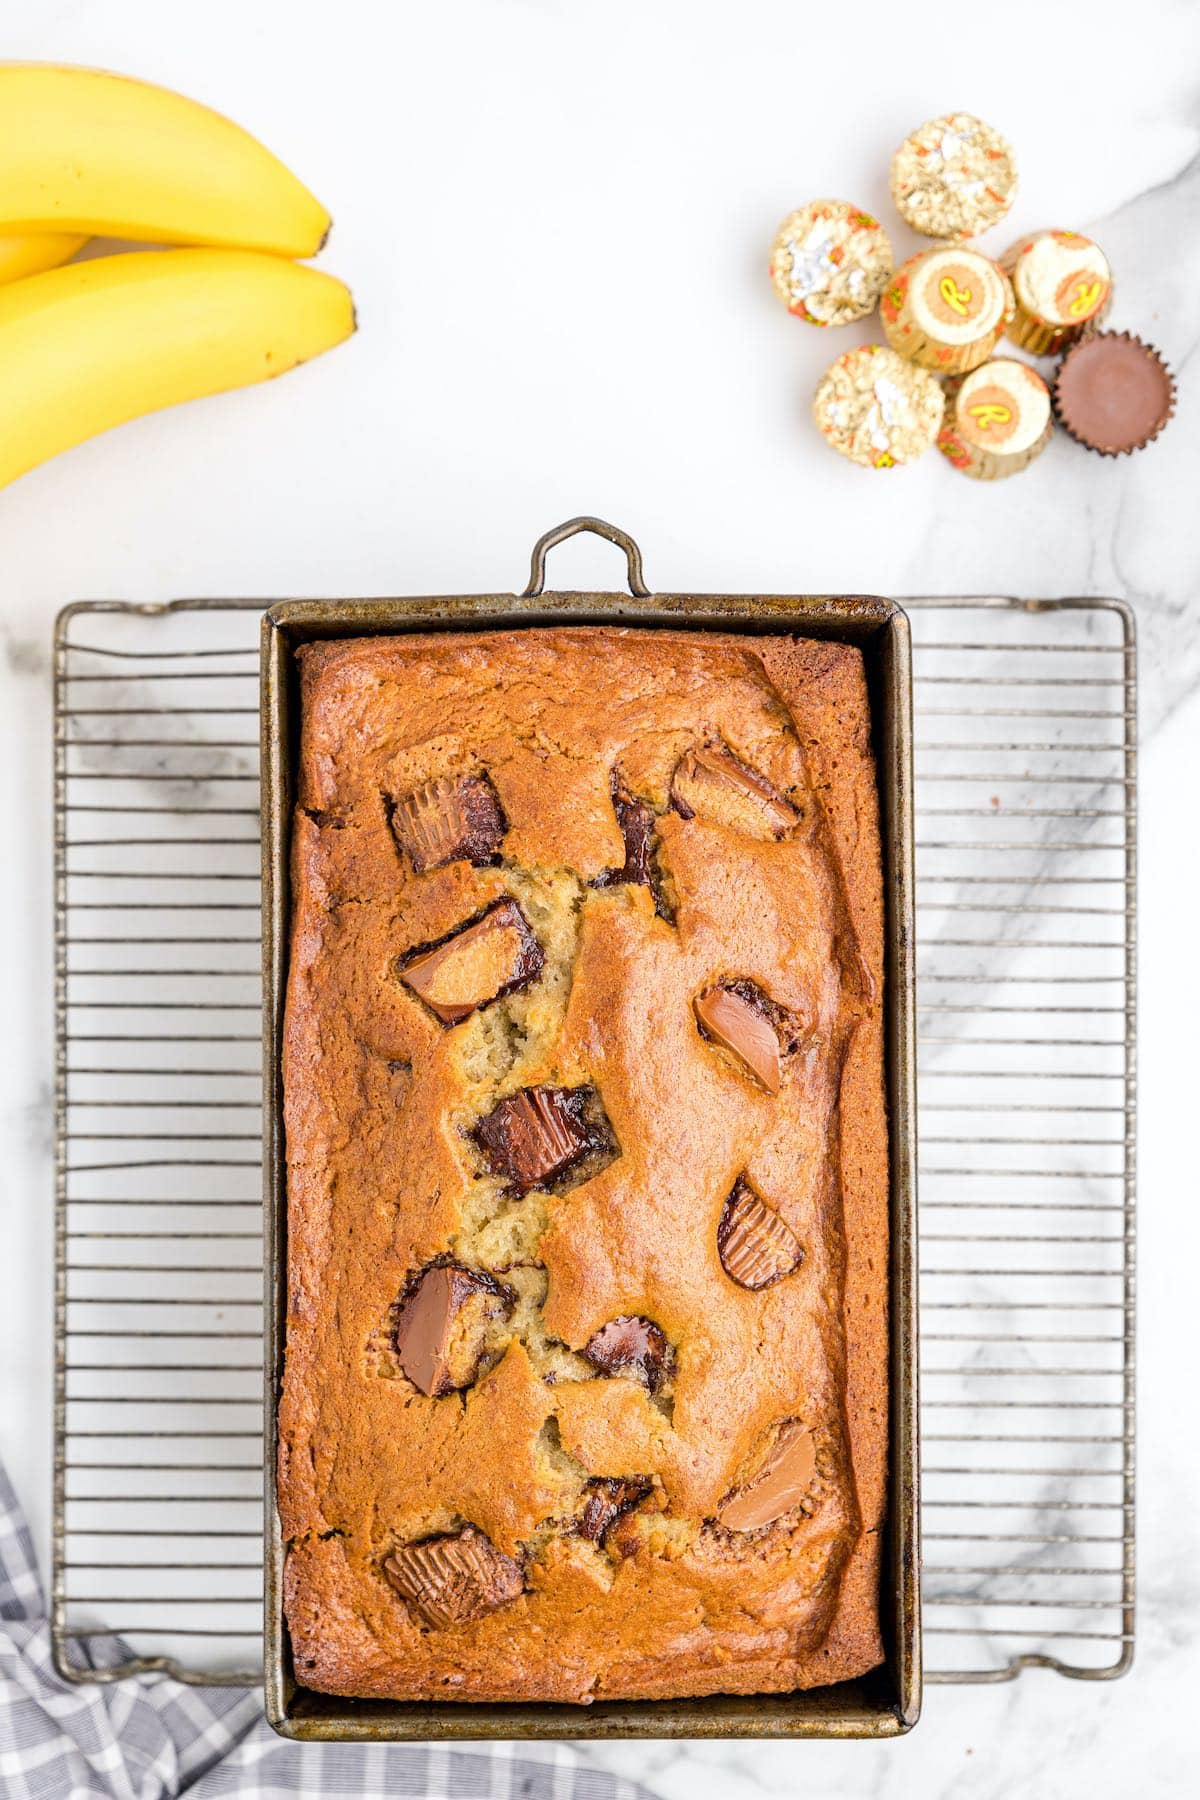 peanut butter banana bread in a loaf pan